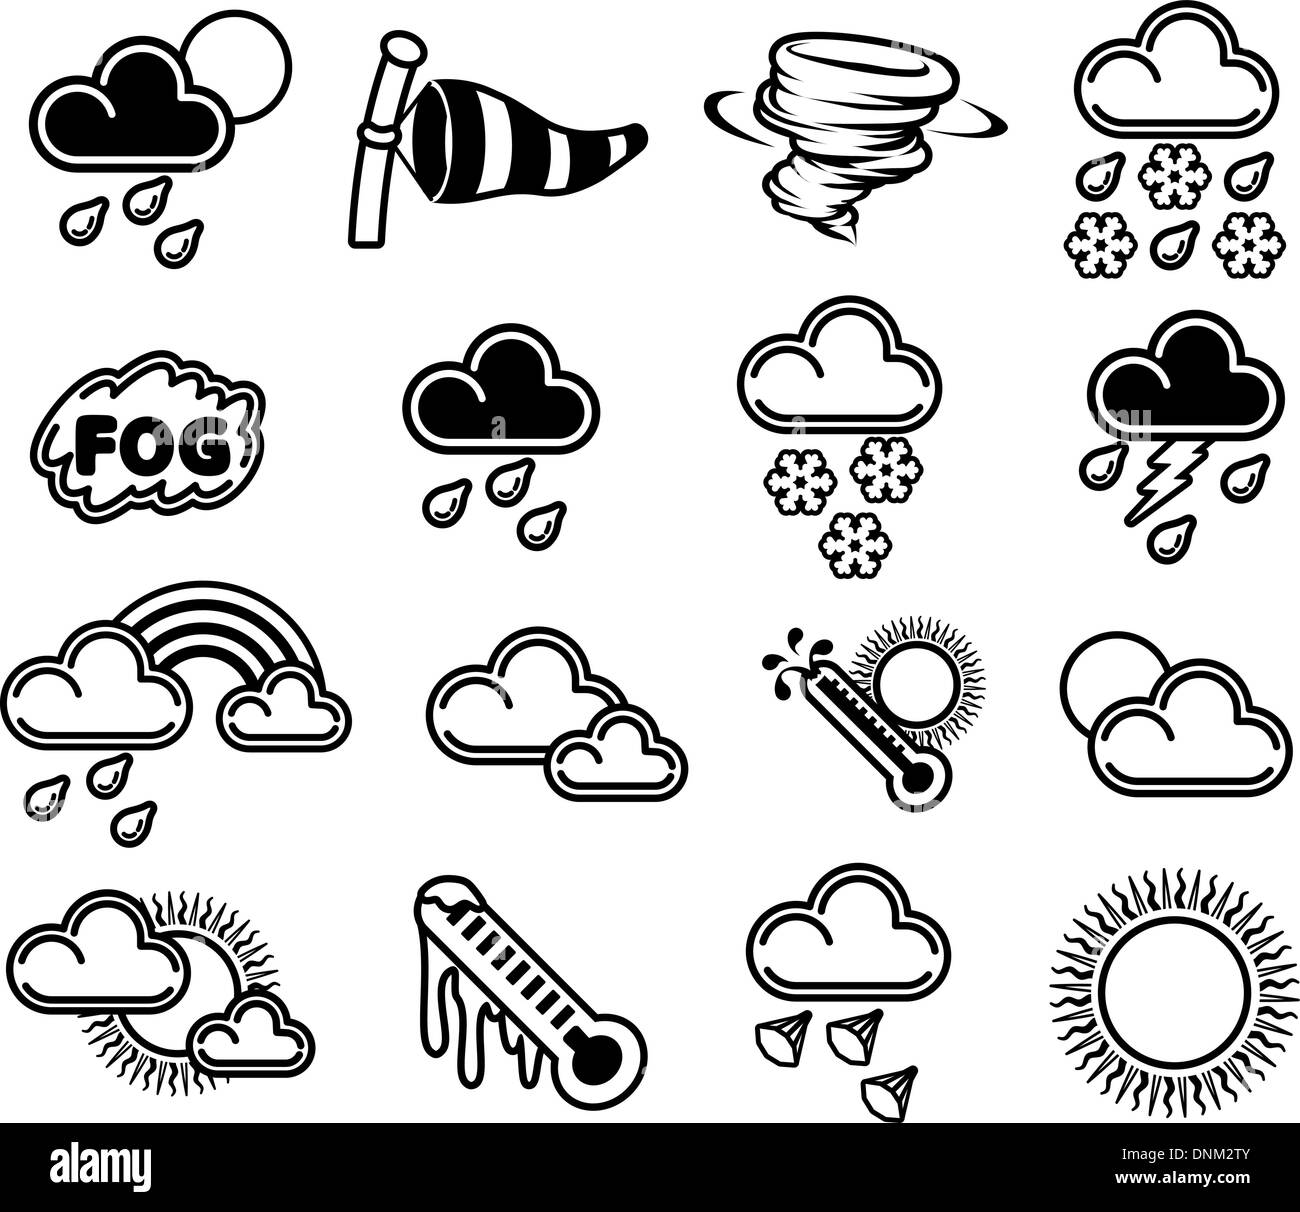 A set of monochrome weather icons like those used in forecasts Stock Vector